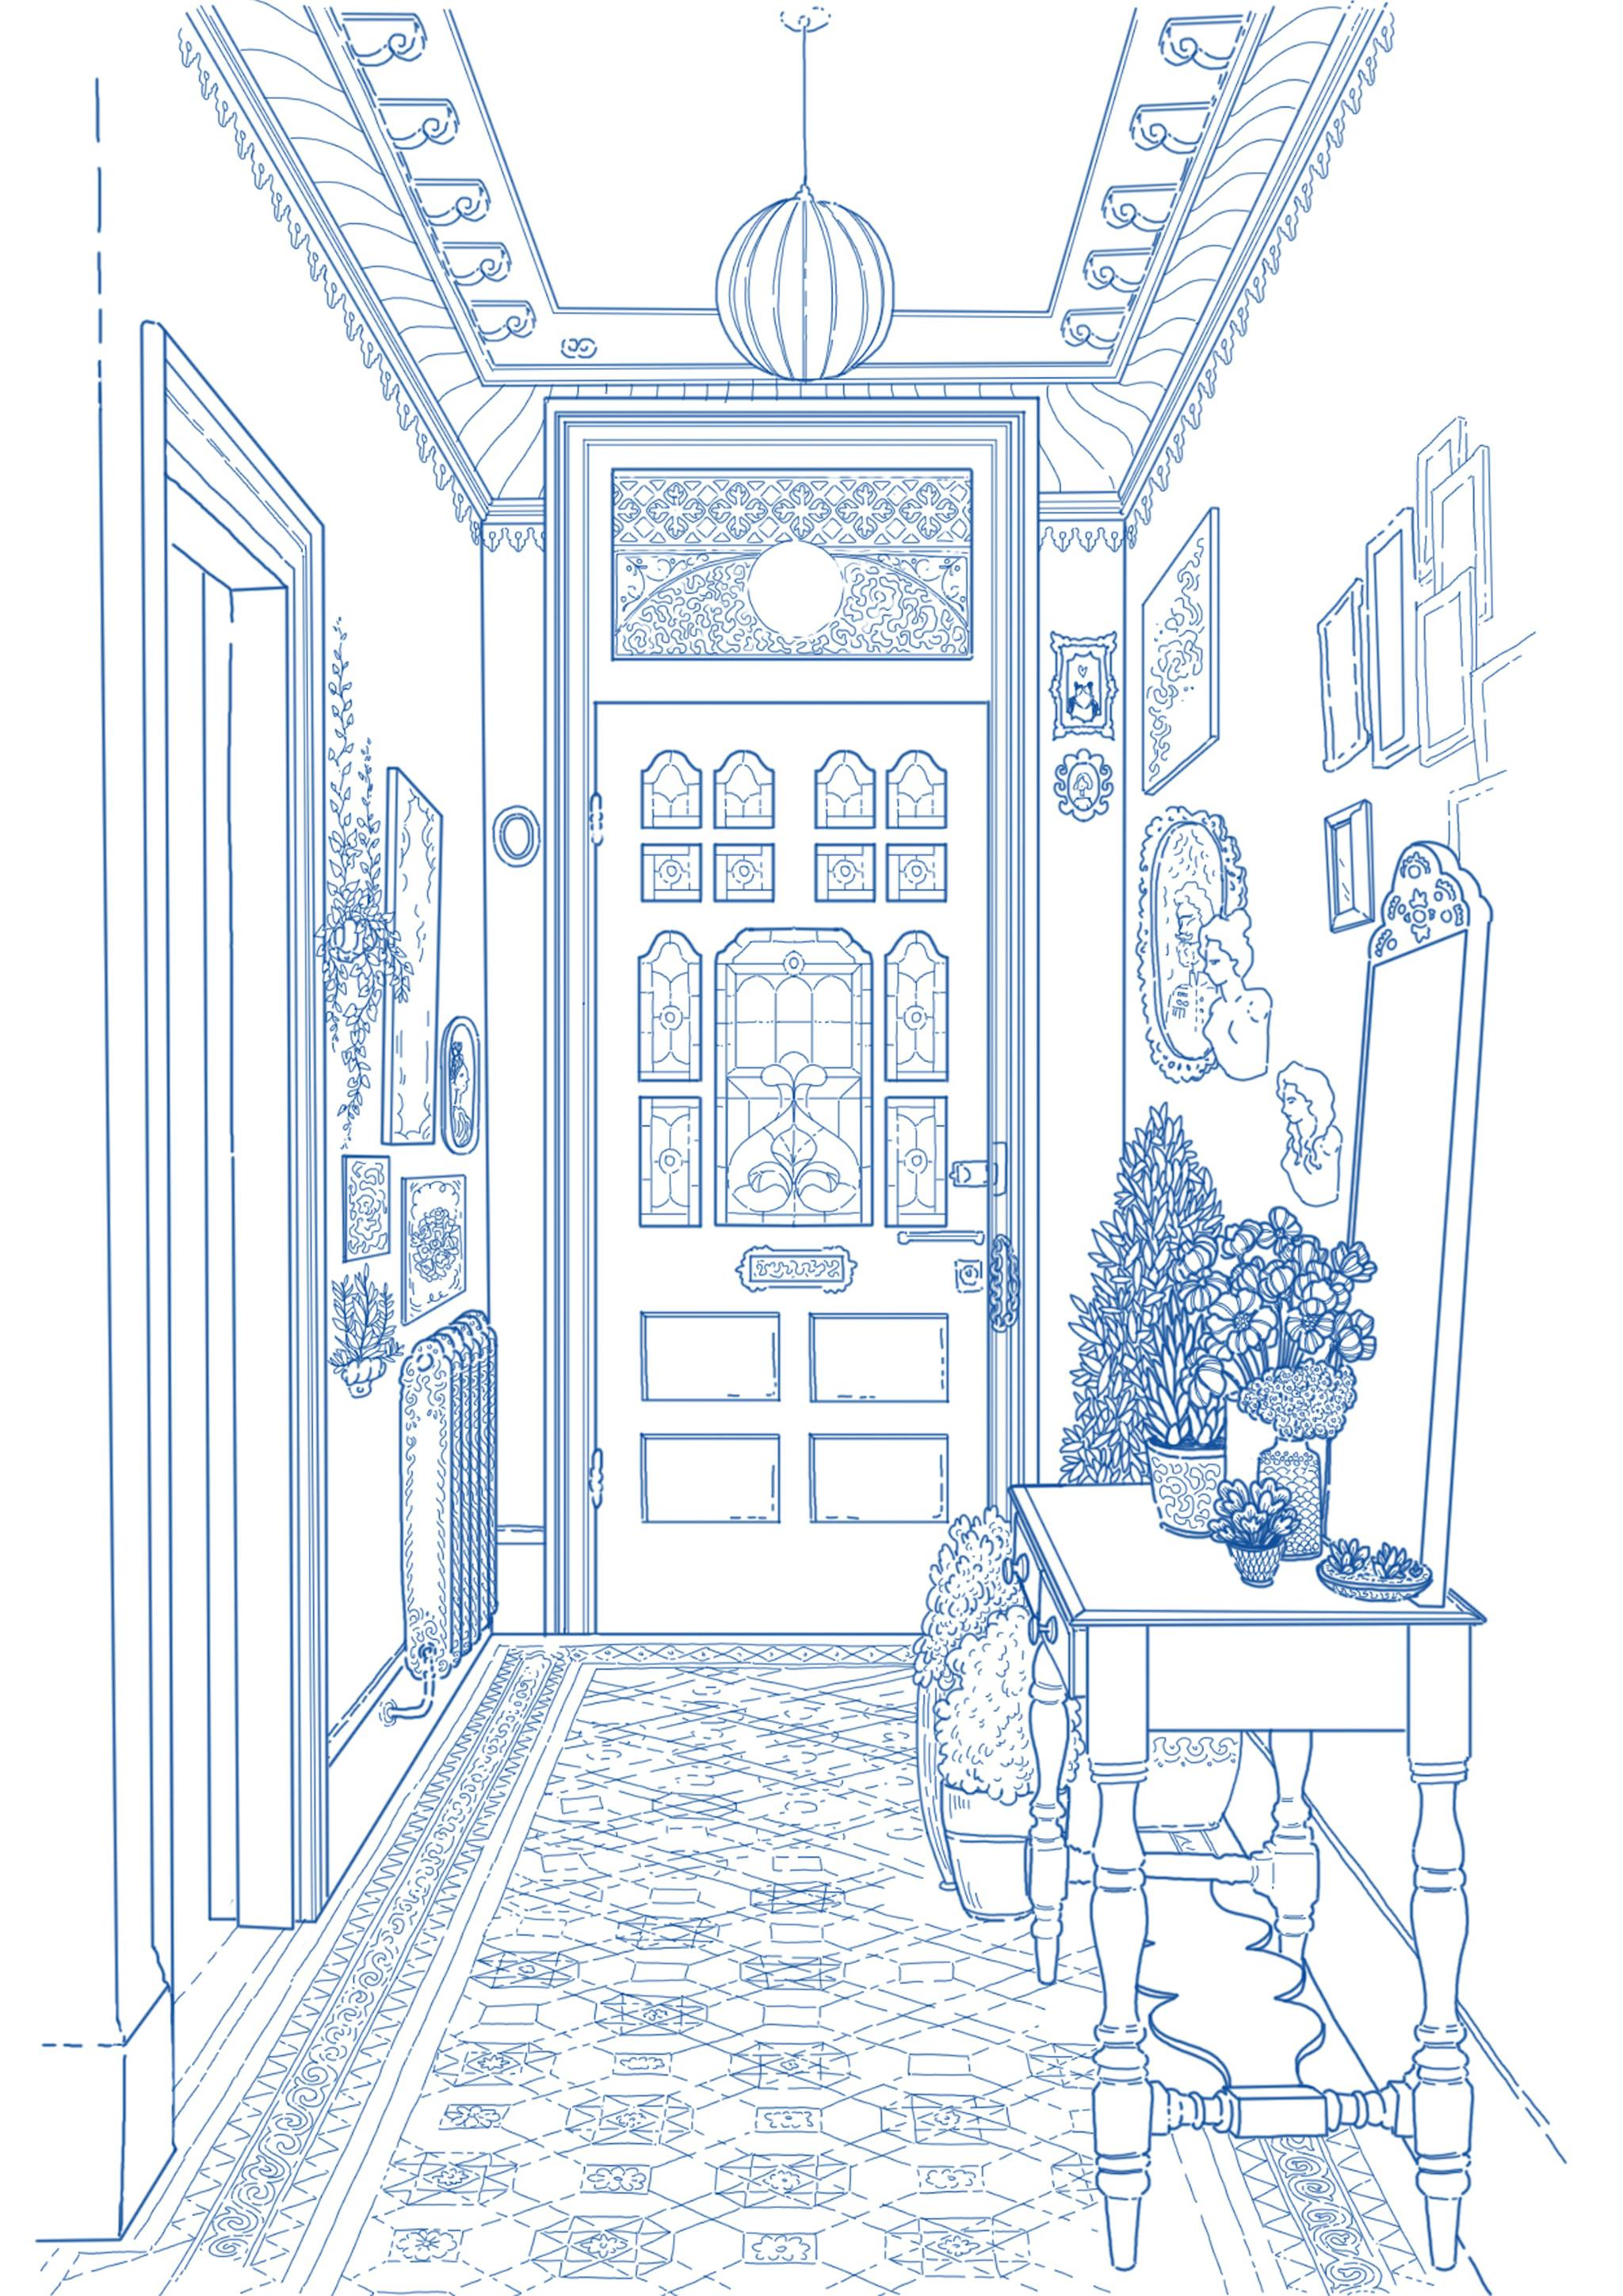 Victoriant hallway with a door, in a blue line style illustration.